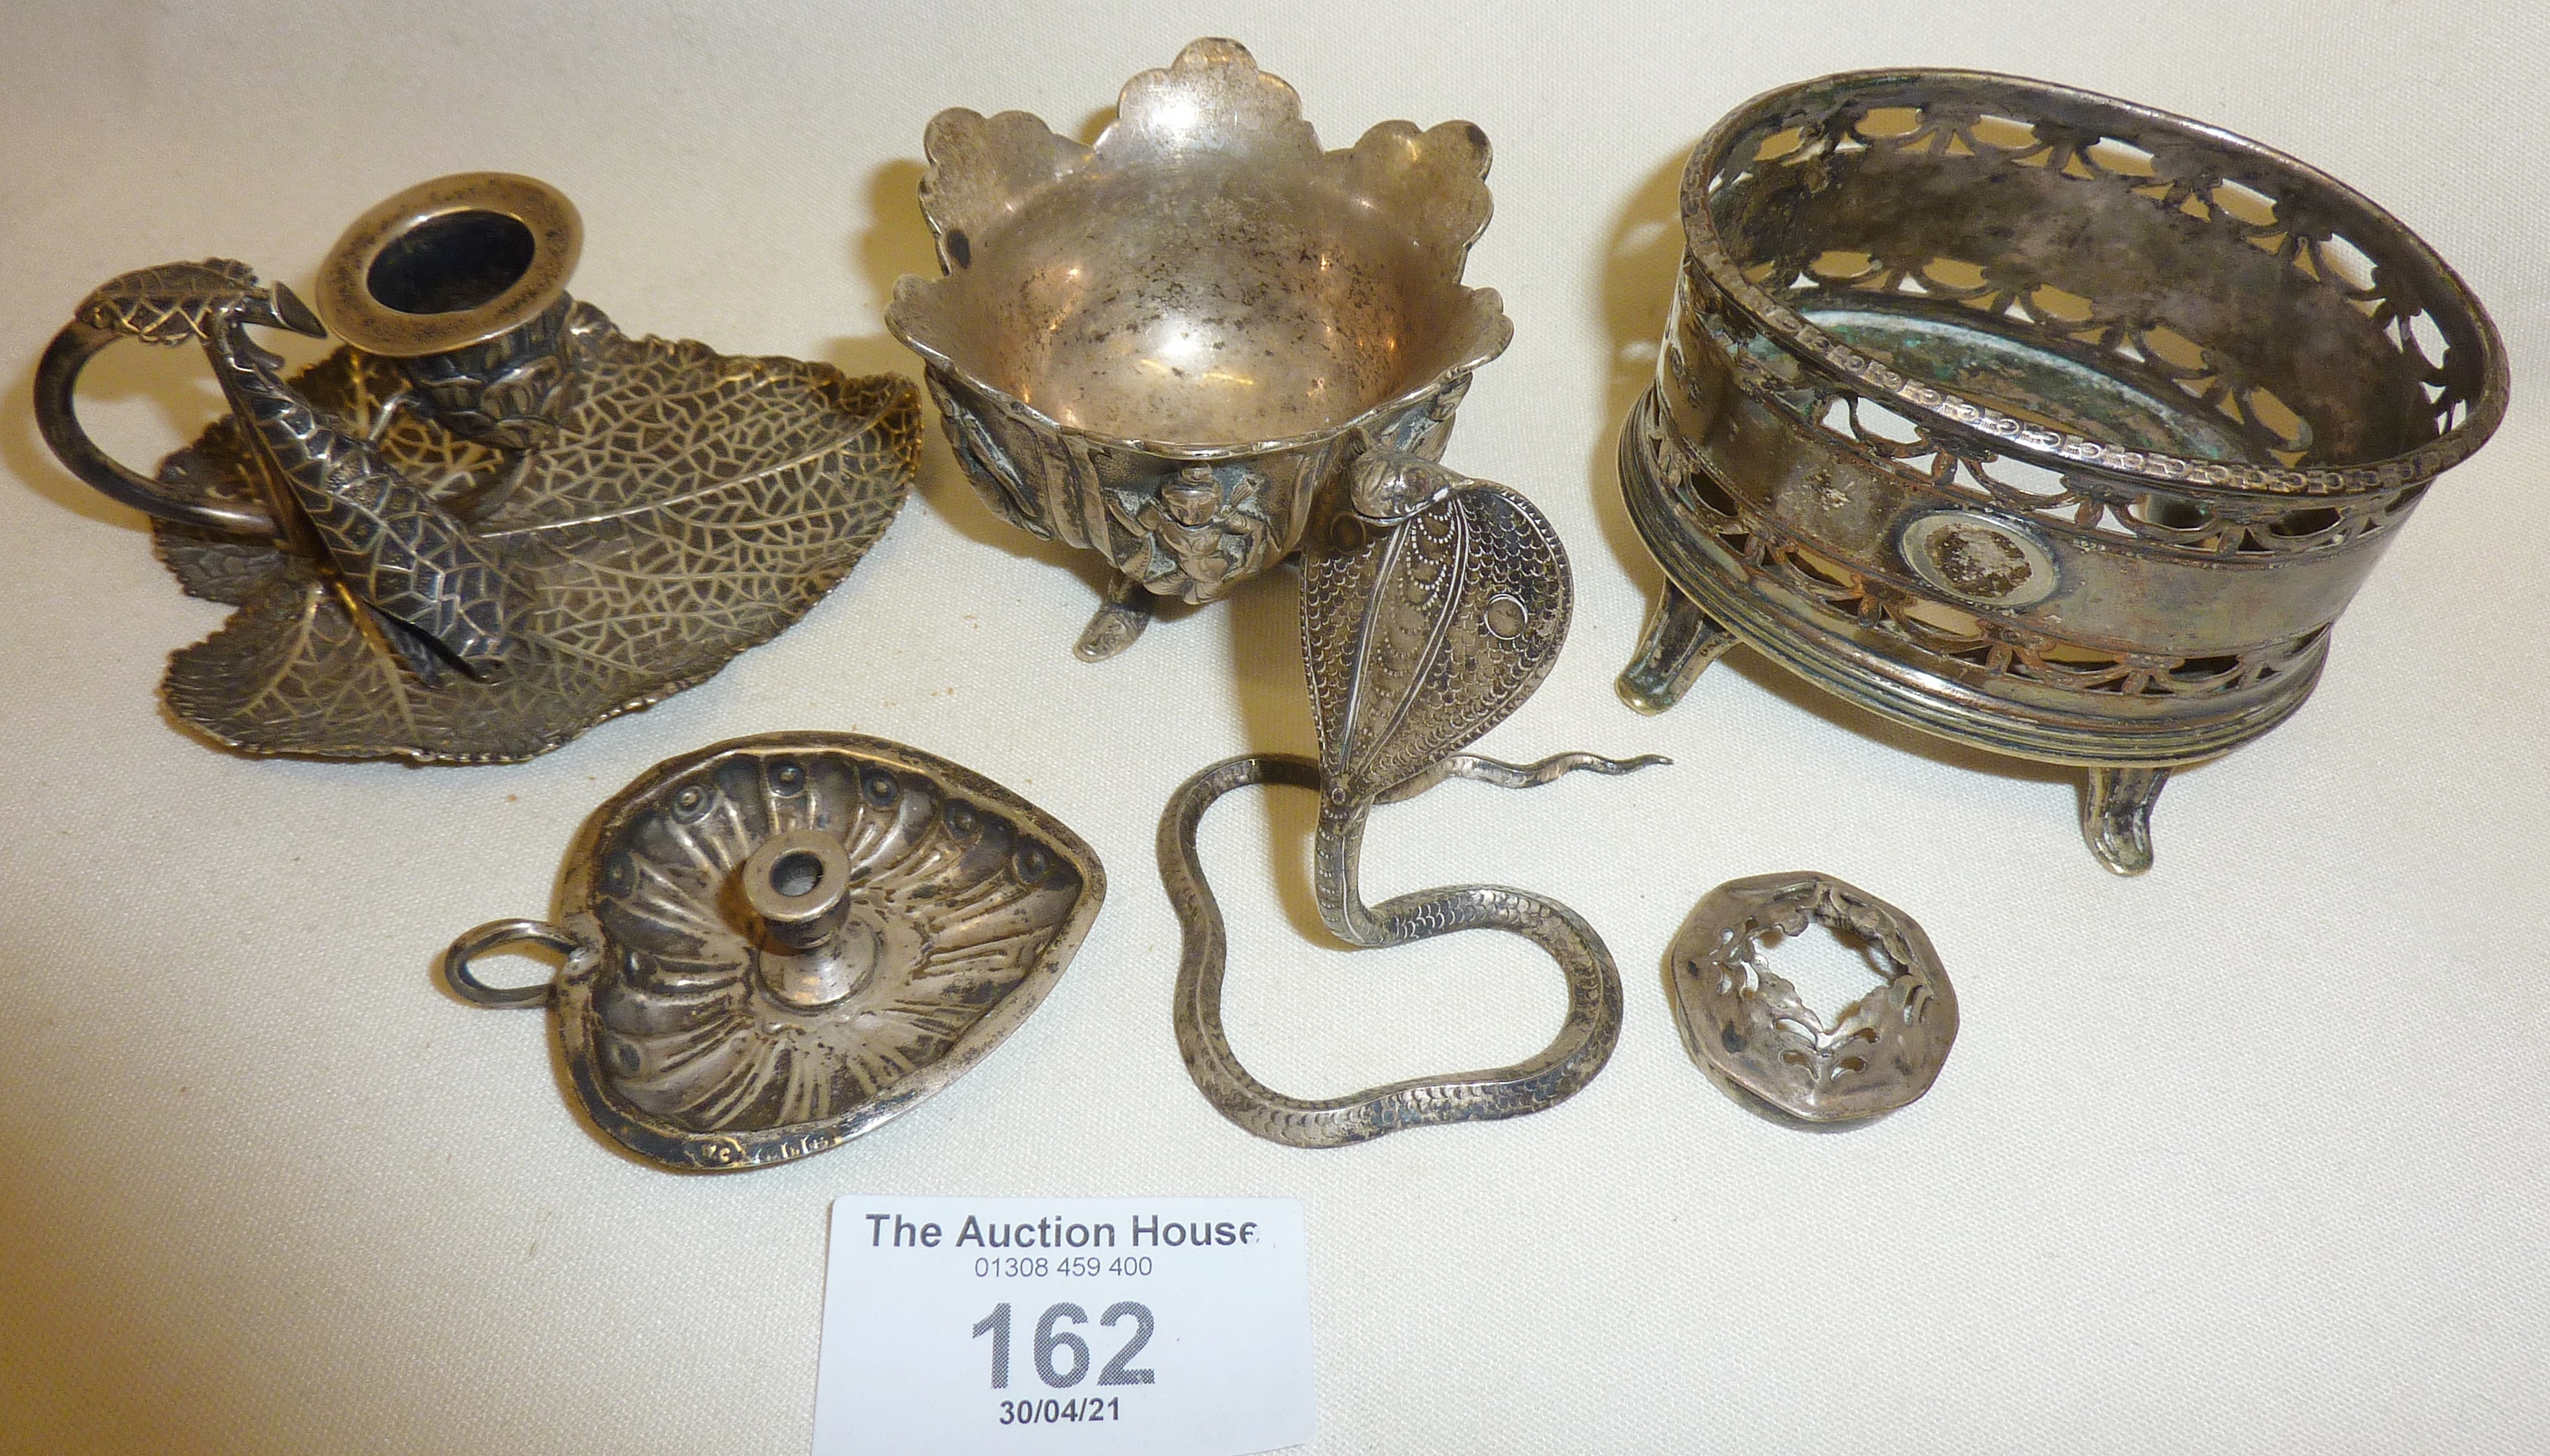 Continental silver and silver plate items, inc. Indian silver snake and a doll's house miniature